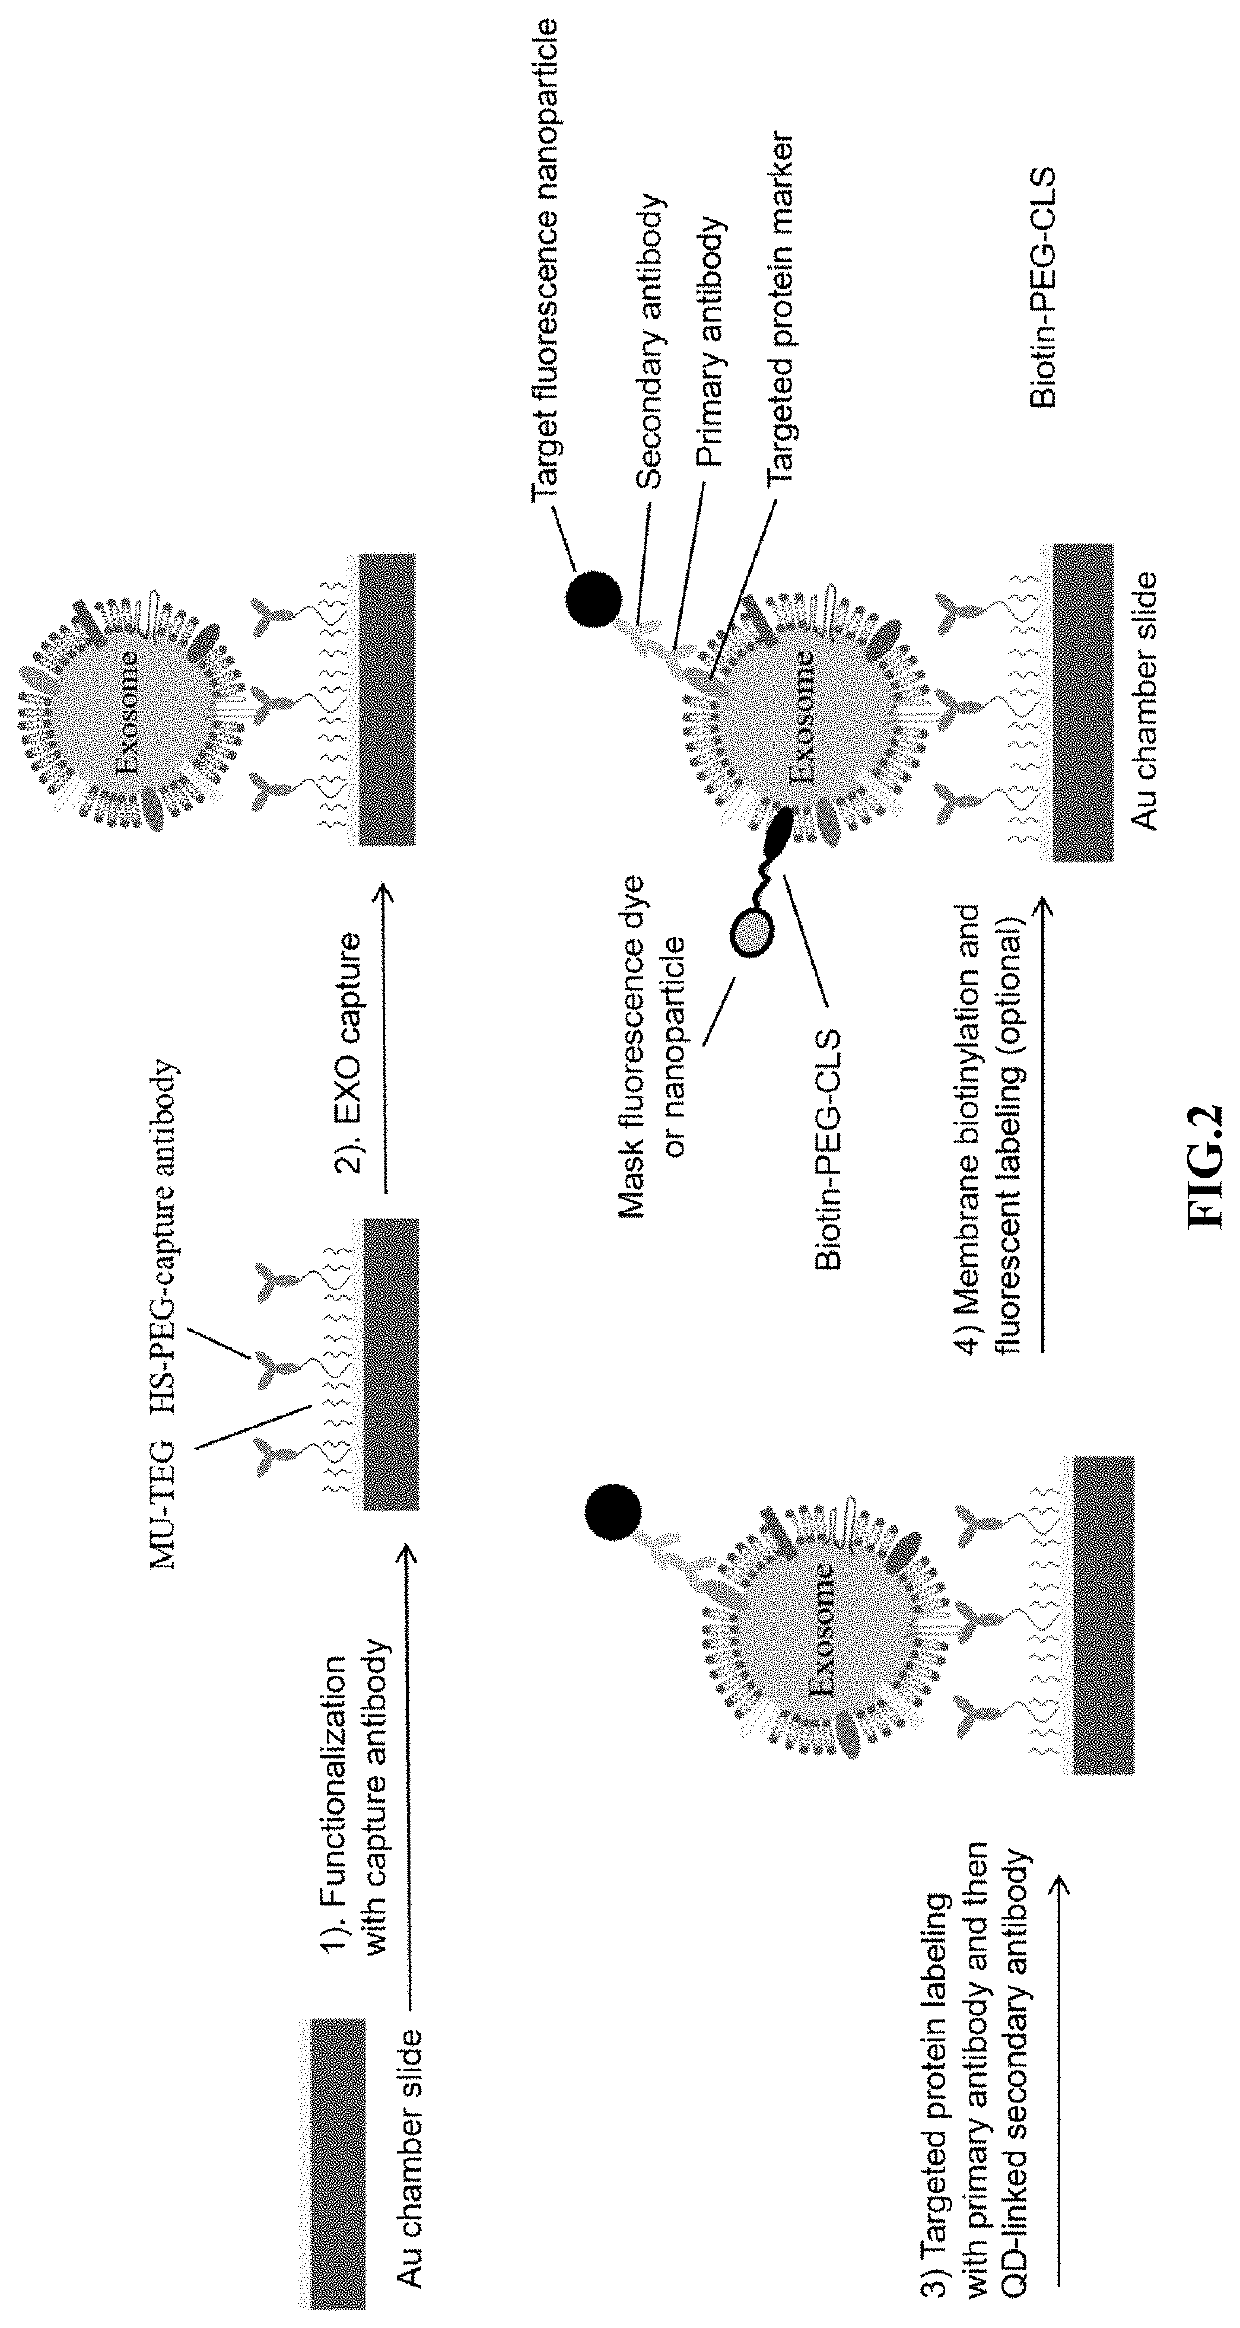 Compositions and methods for the detection and molecular profiling of membrane bound vesicles